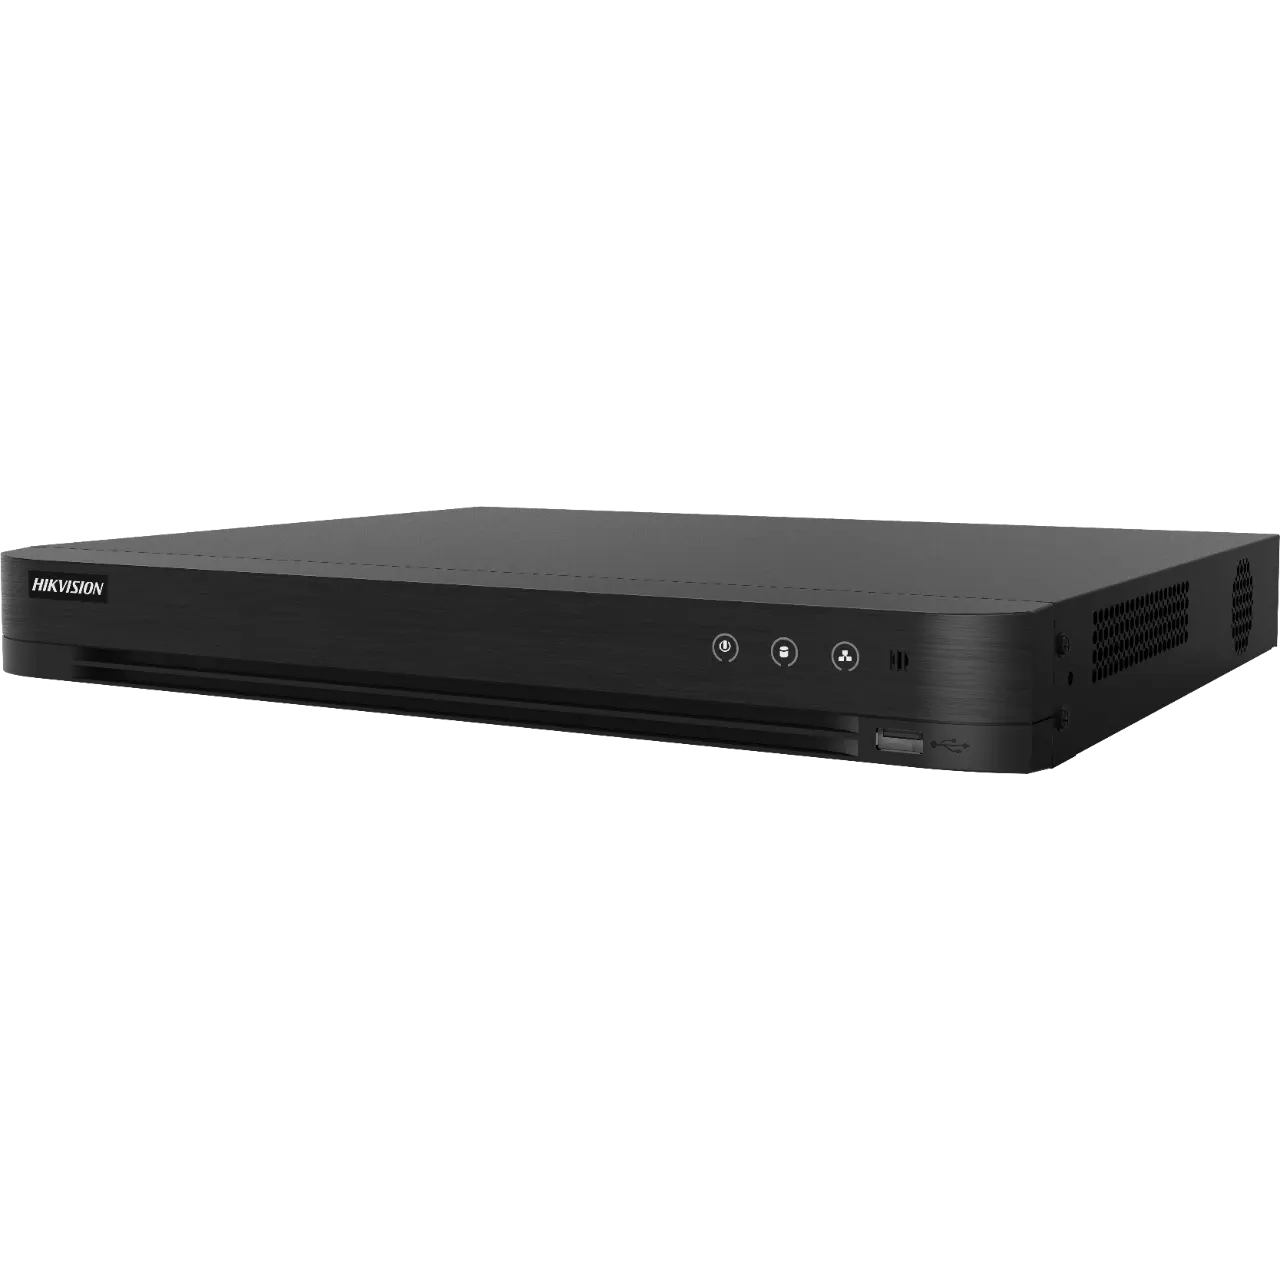 Hikvision iDS-7232HQHI-M2/S 32-Channel 2-Sata HDDs AcuSense 5M/1080P HD Digital Video Recorder DVR/XVR (Motion Detection and Human/Vehicle Analysis)